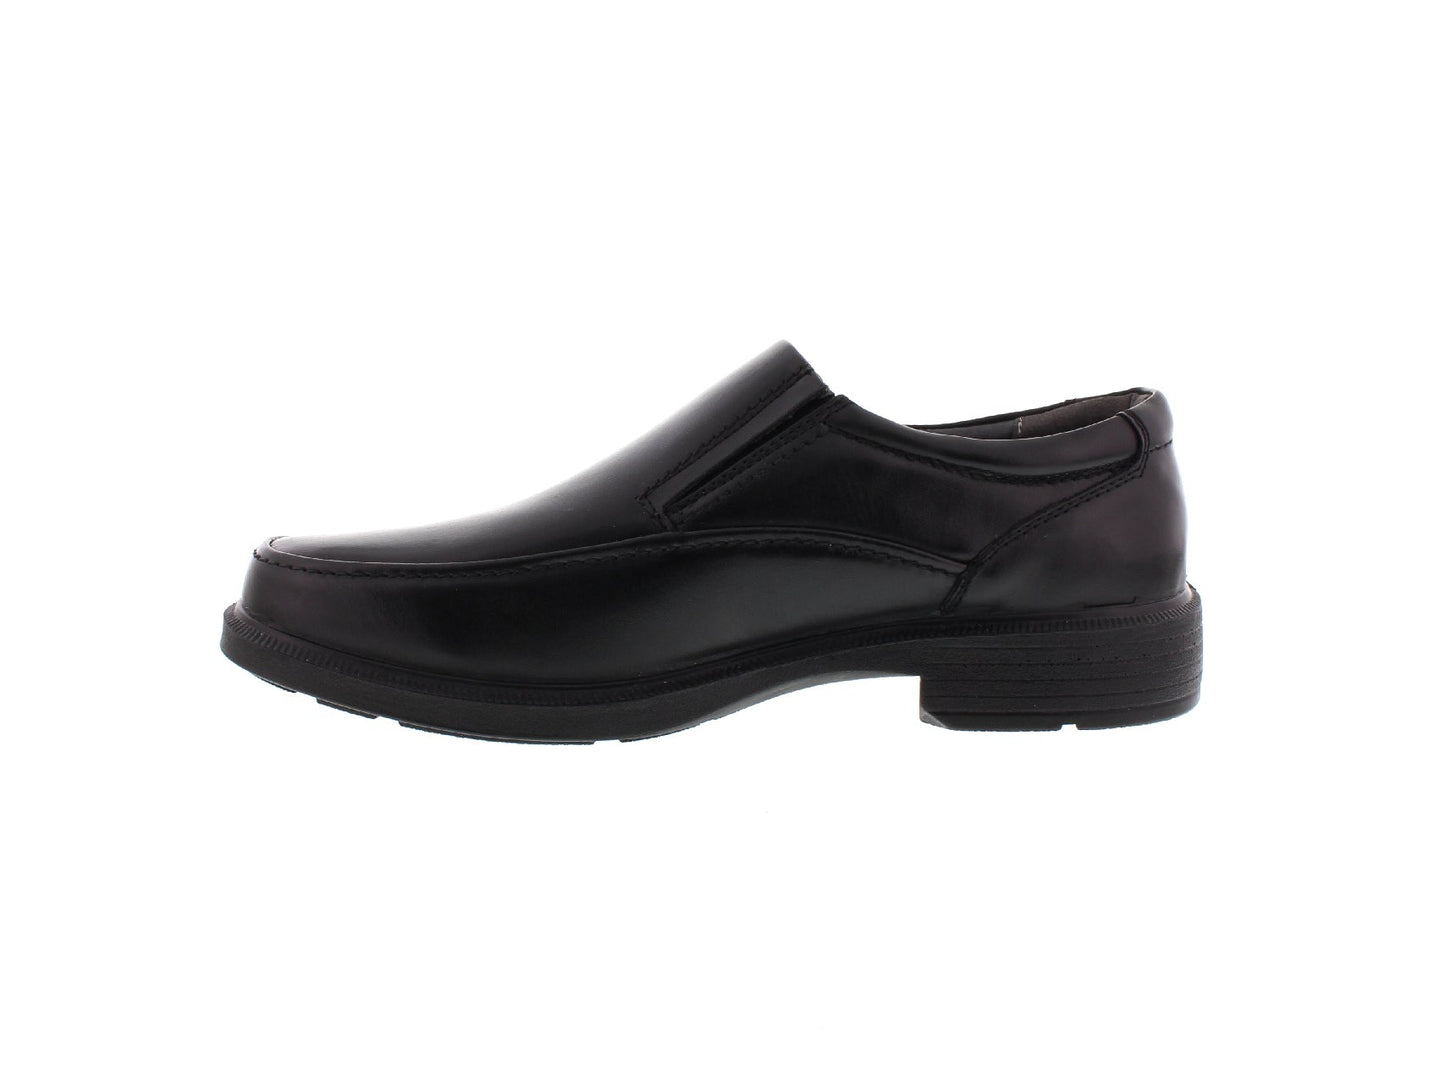 Men's Brooklyn Cushioned Comfort Leather Dress Casual Slip-on Loafer